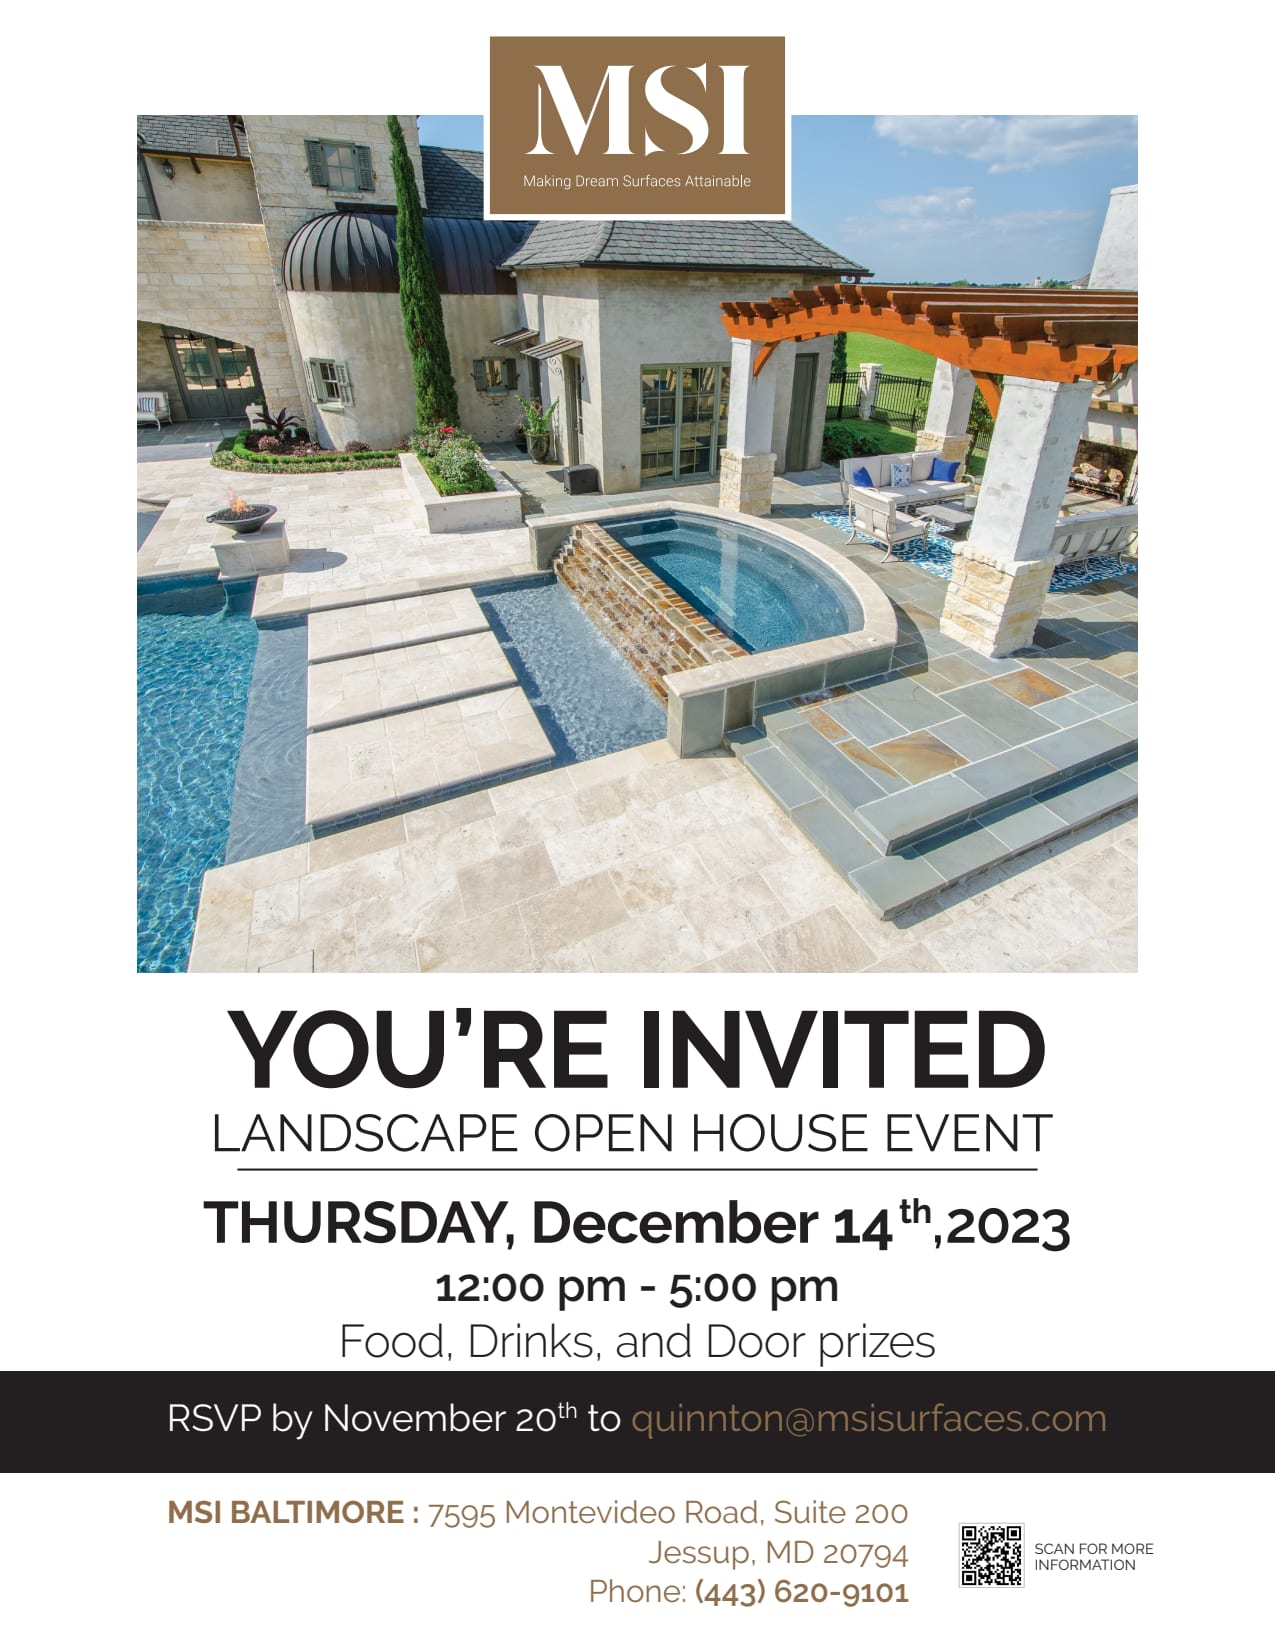 MSI Surfaces is Hosting a Landscape Open House on Dec 14, 2023